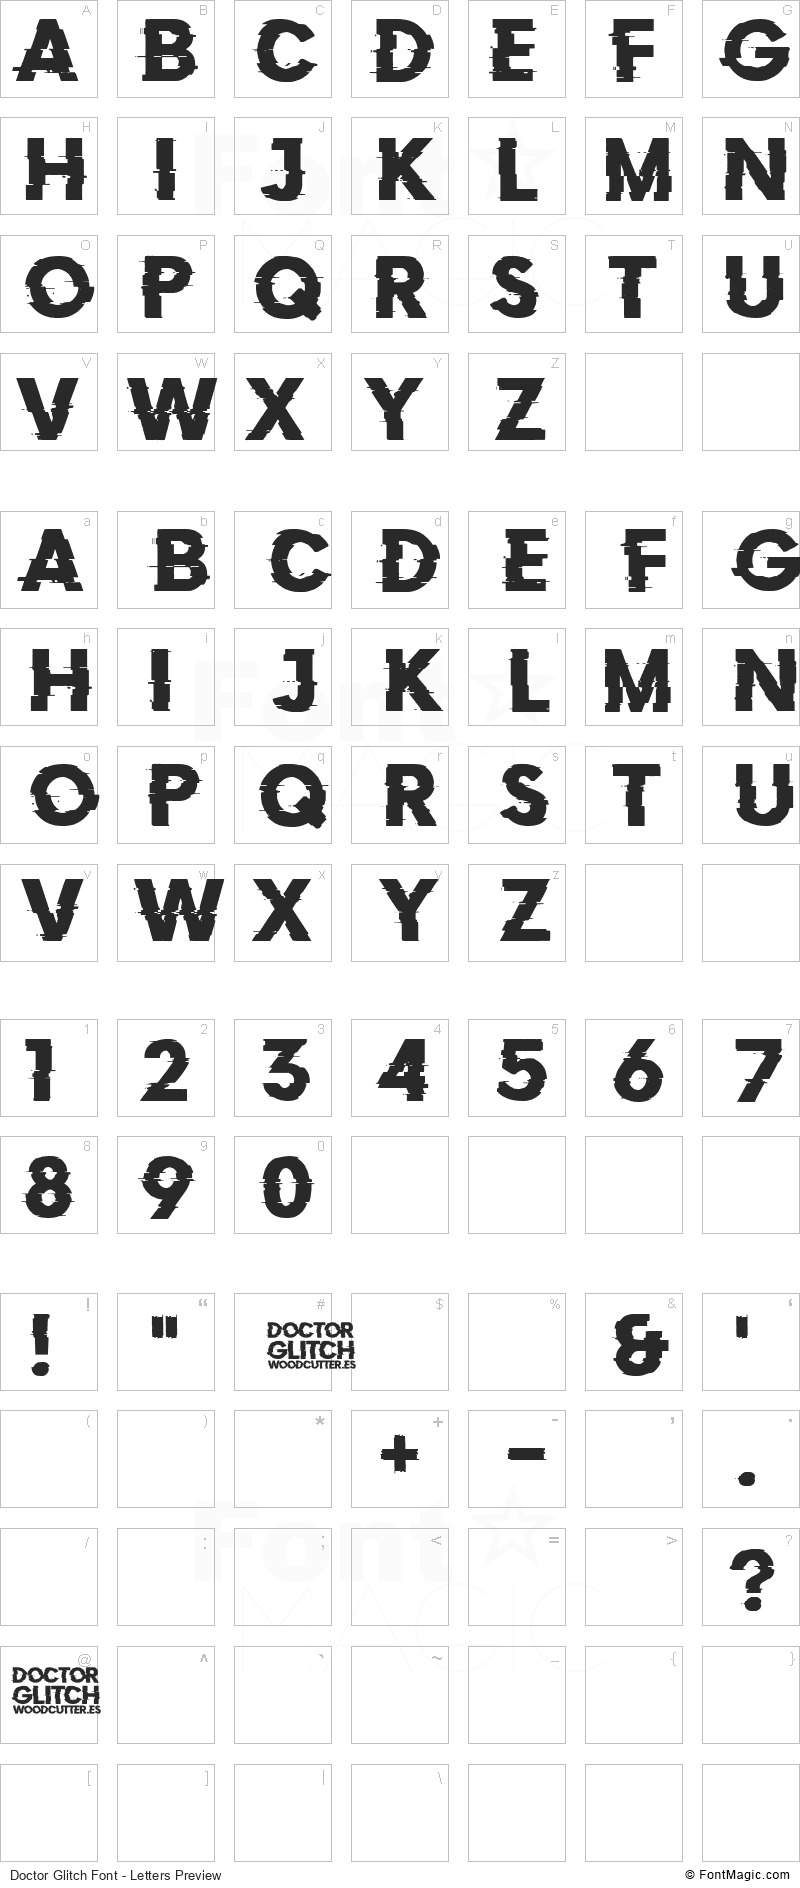 Doctor Glitch Font - All Latters Preview Chart